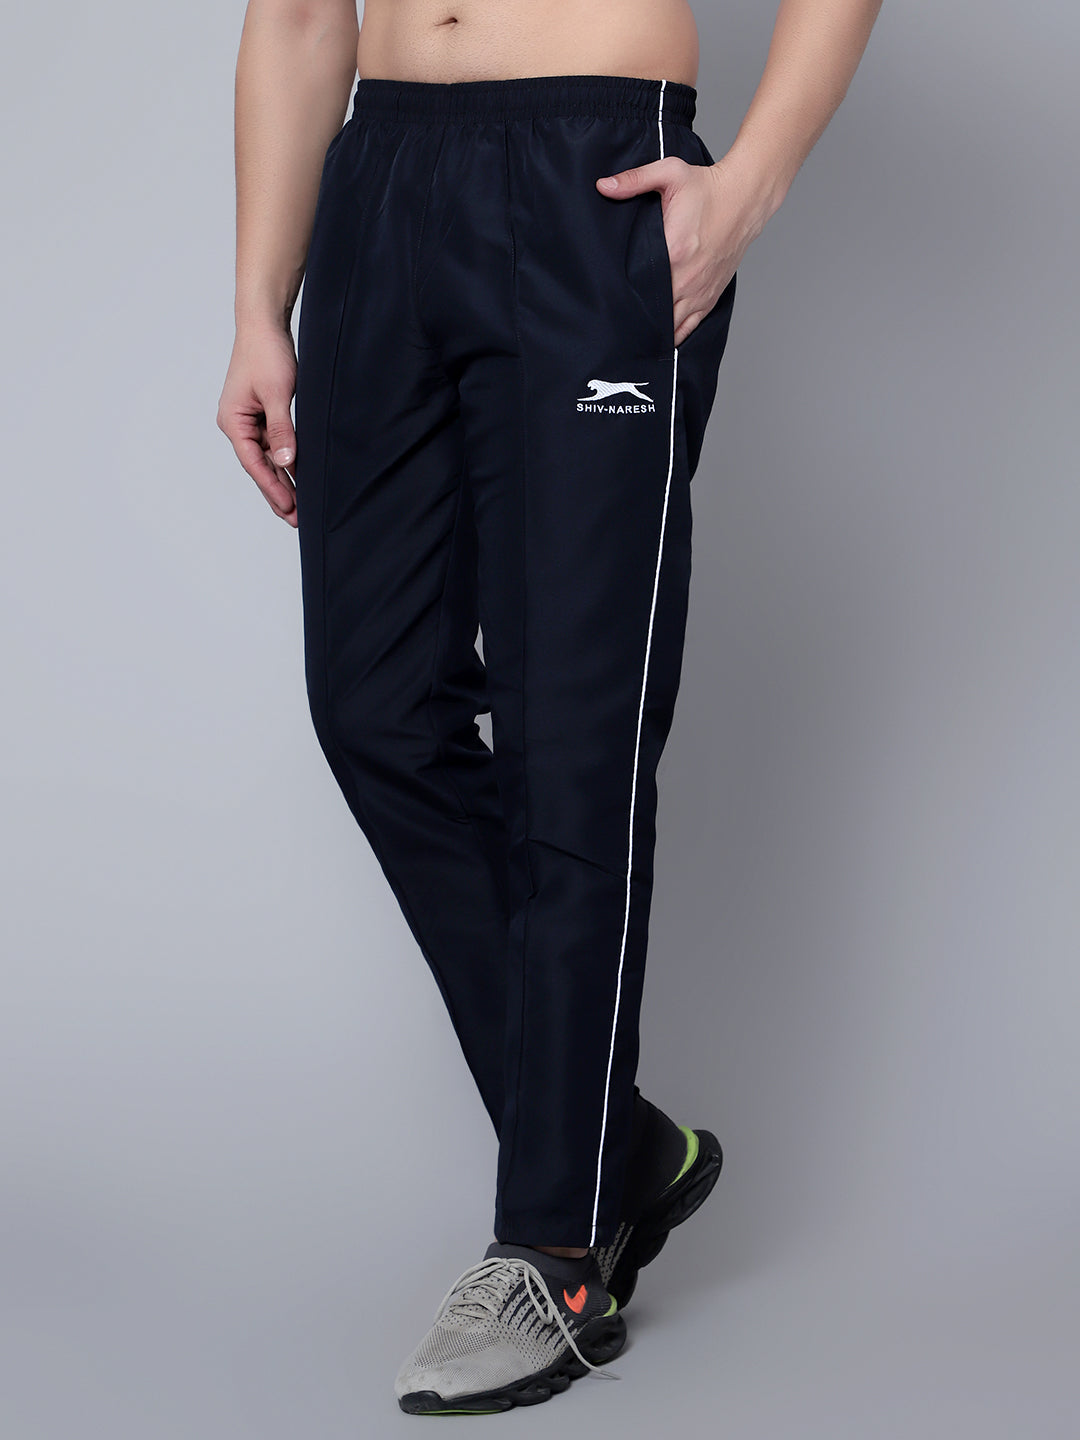 Stretchable Cotton Material Mens Track Pant  Track Pant Manufacturer in  Mumbai  India